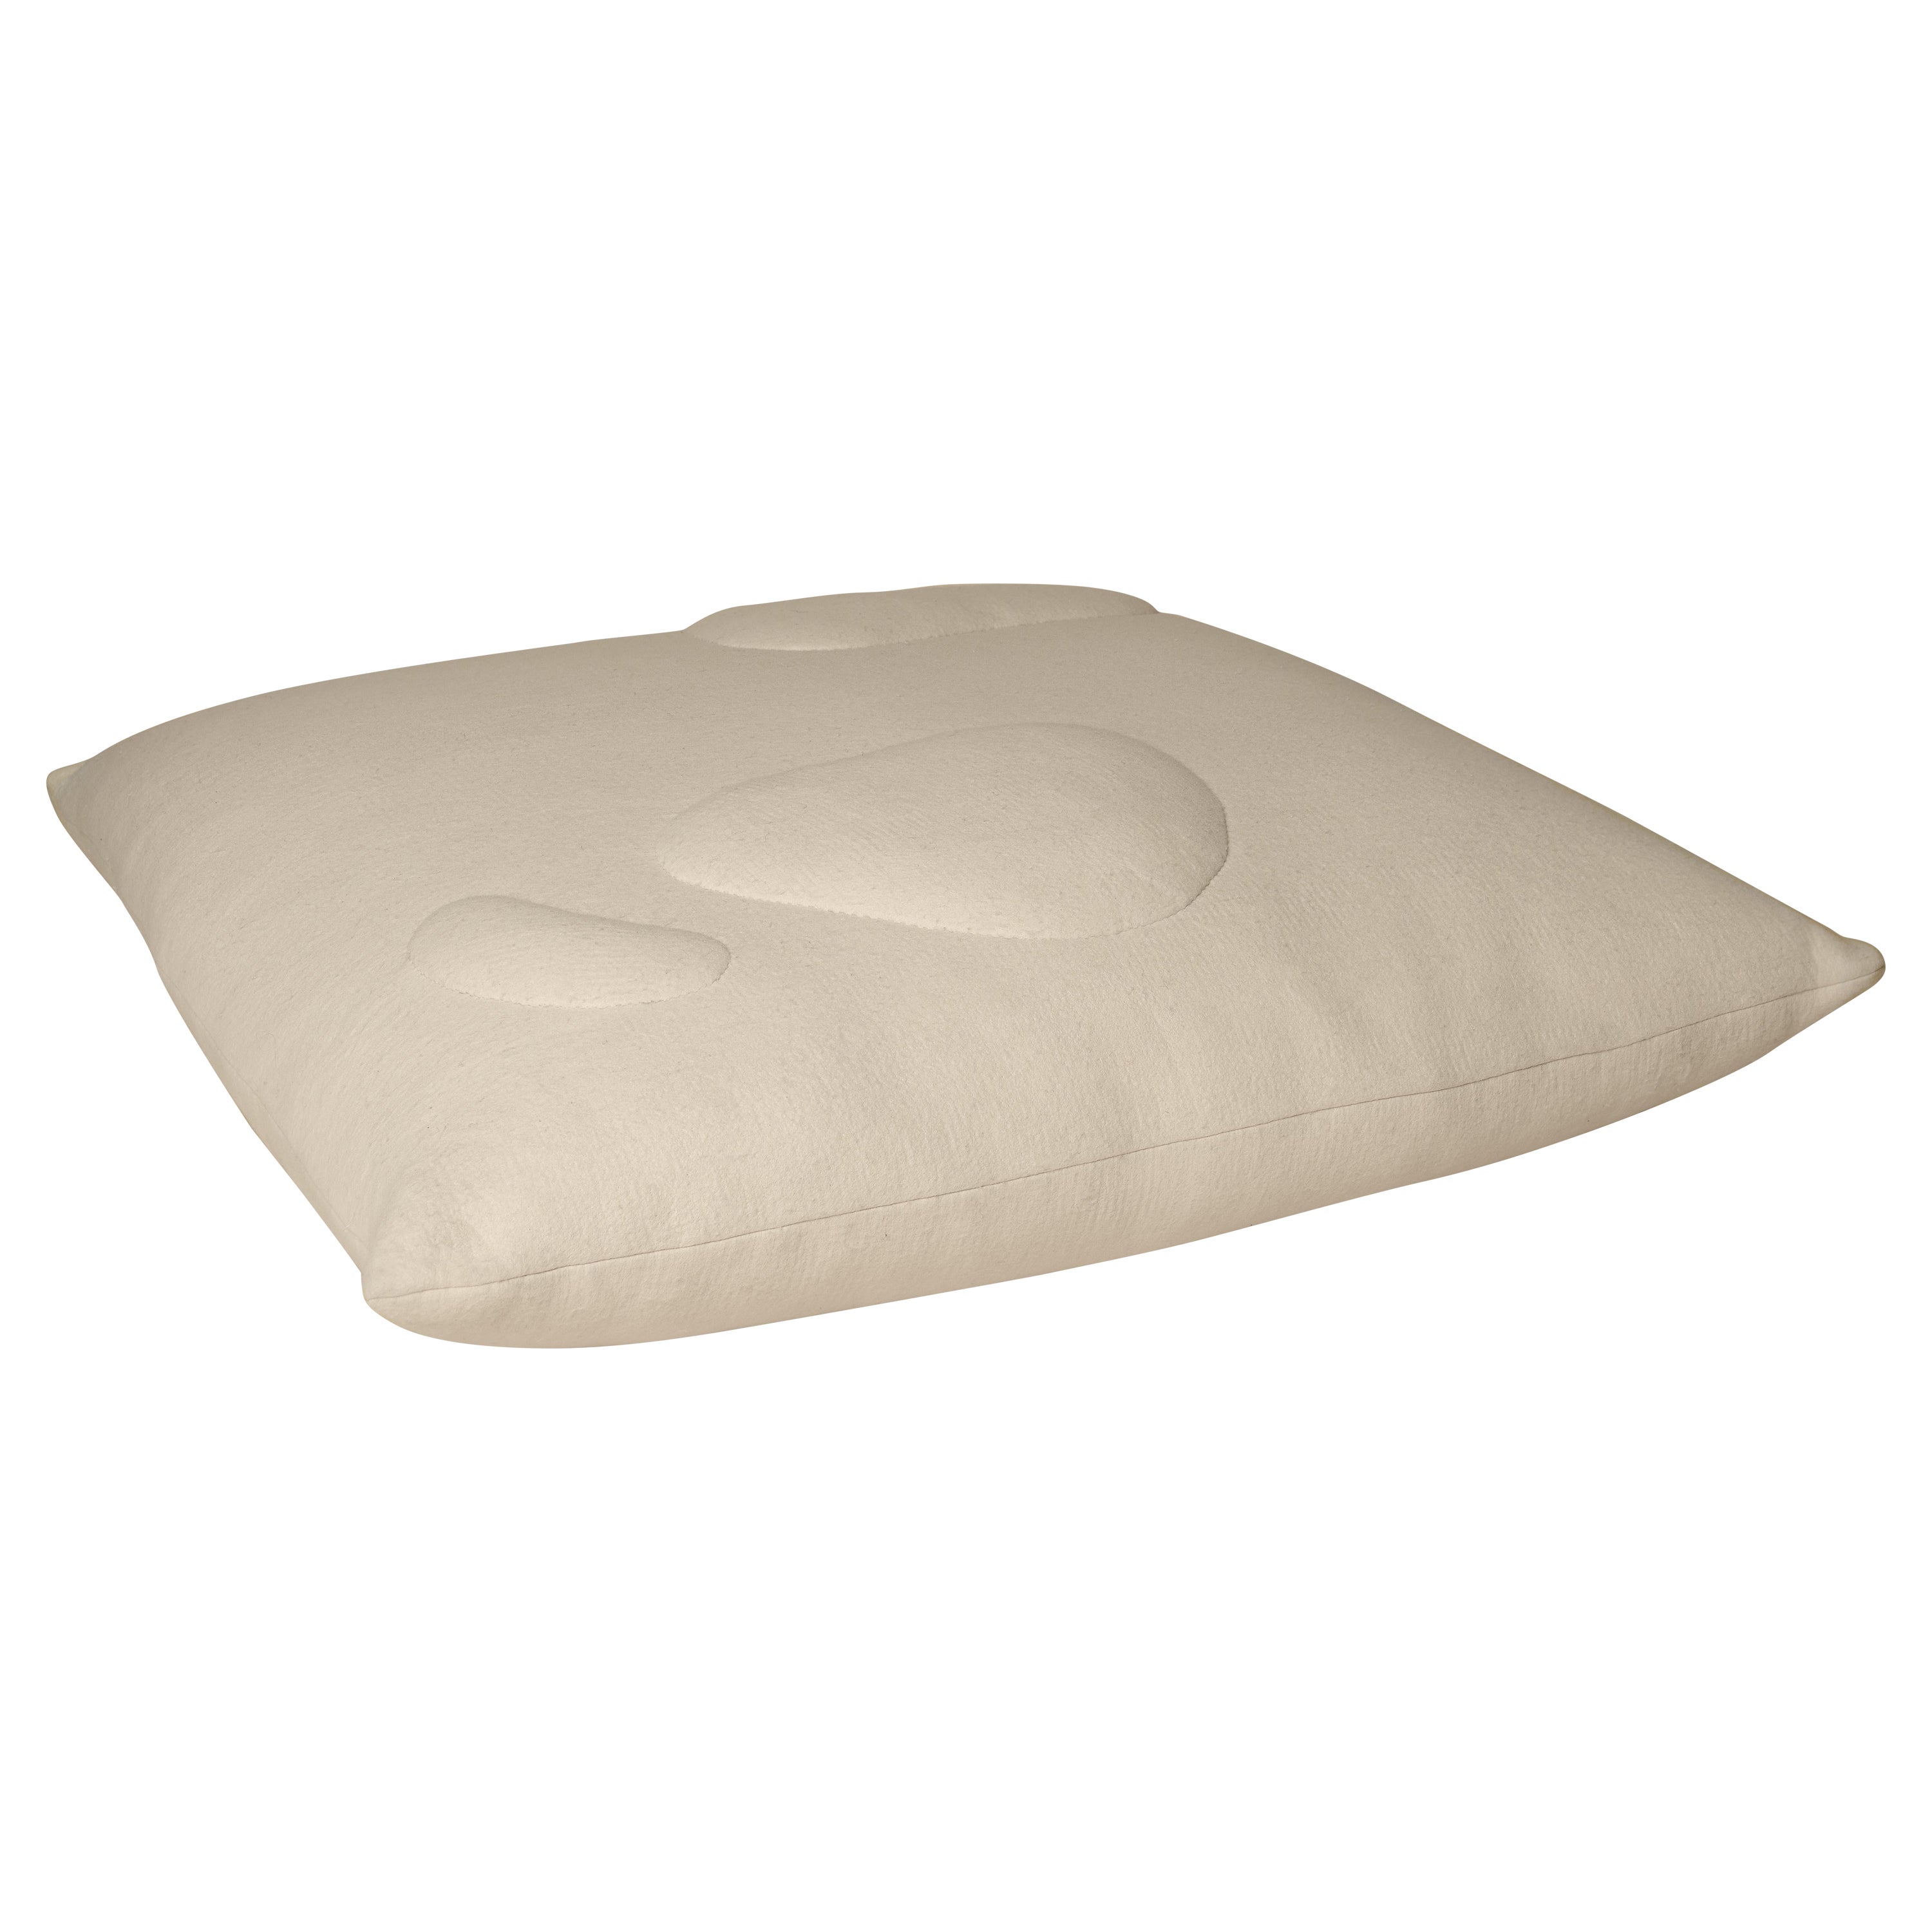 Sheep Floor Pillow by Studio Ahead - Cream For Sale